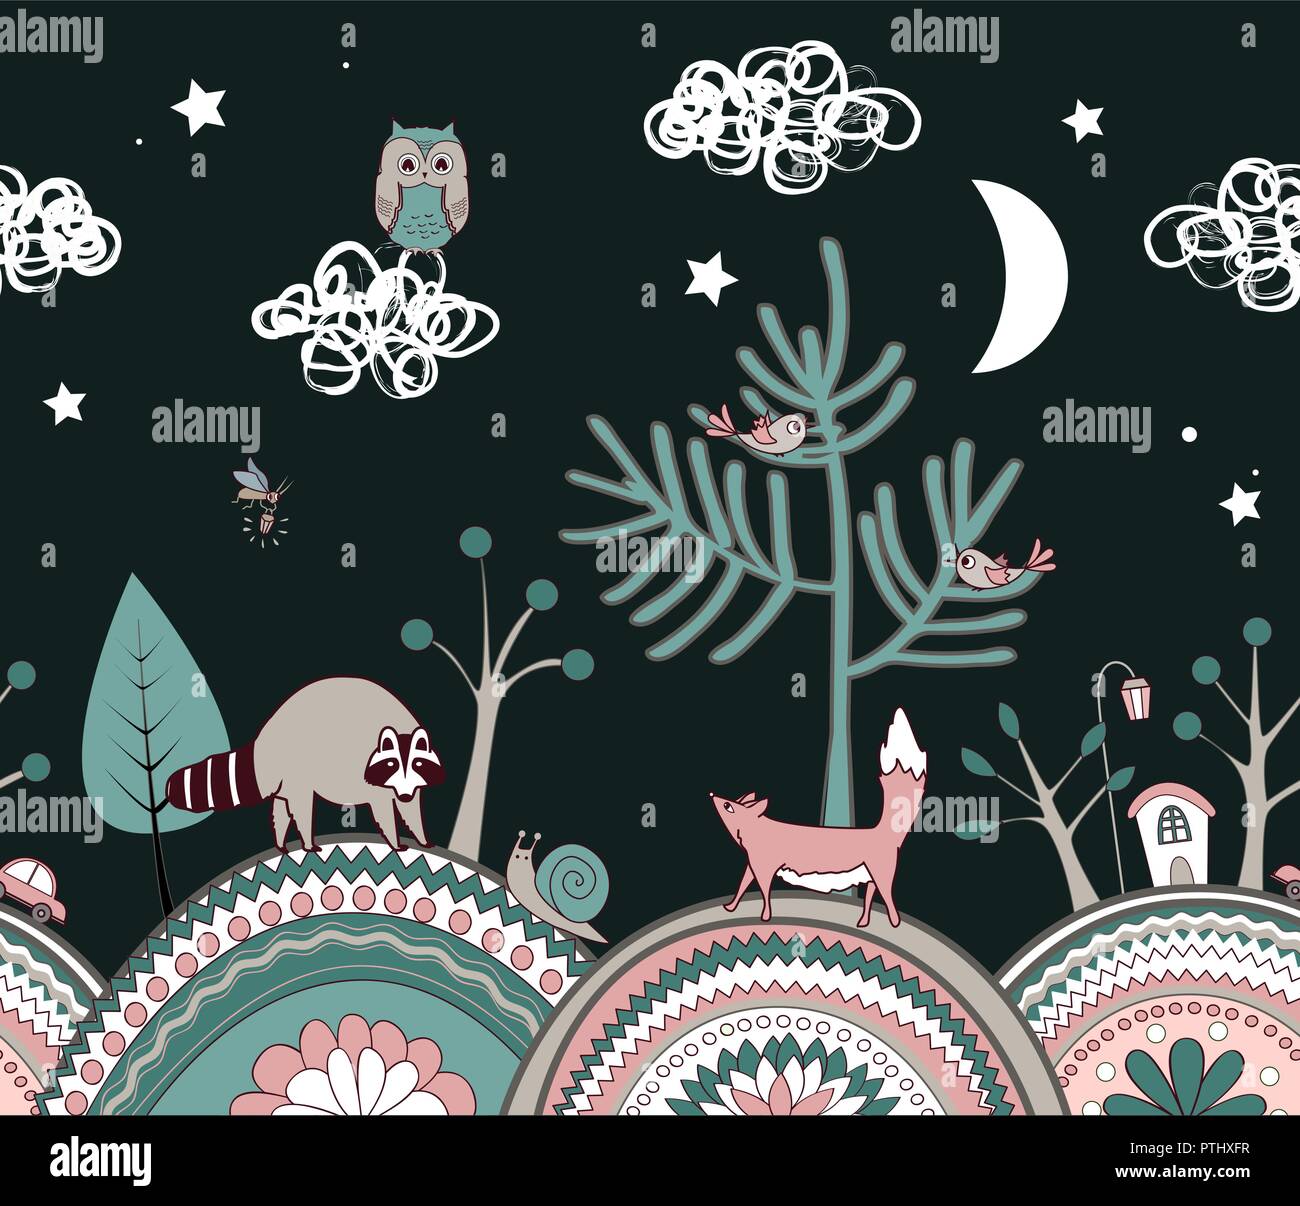 Cute doodle kids seamless pattern with ornamented hills, and cartoon trees and animals. Fairy night vector illustration. Stock Vector